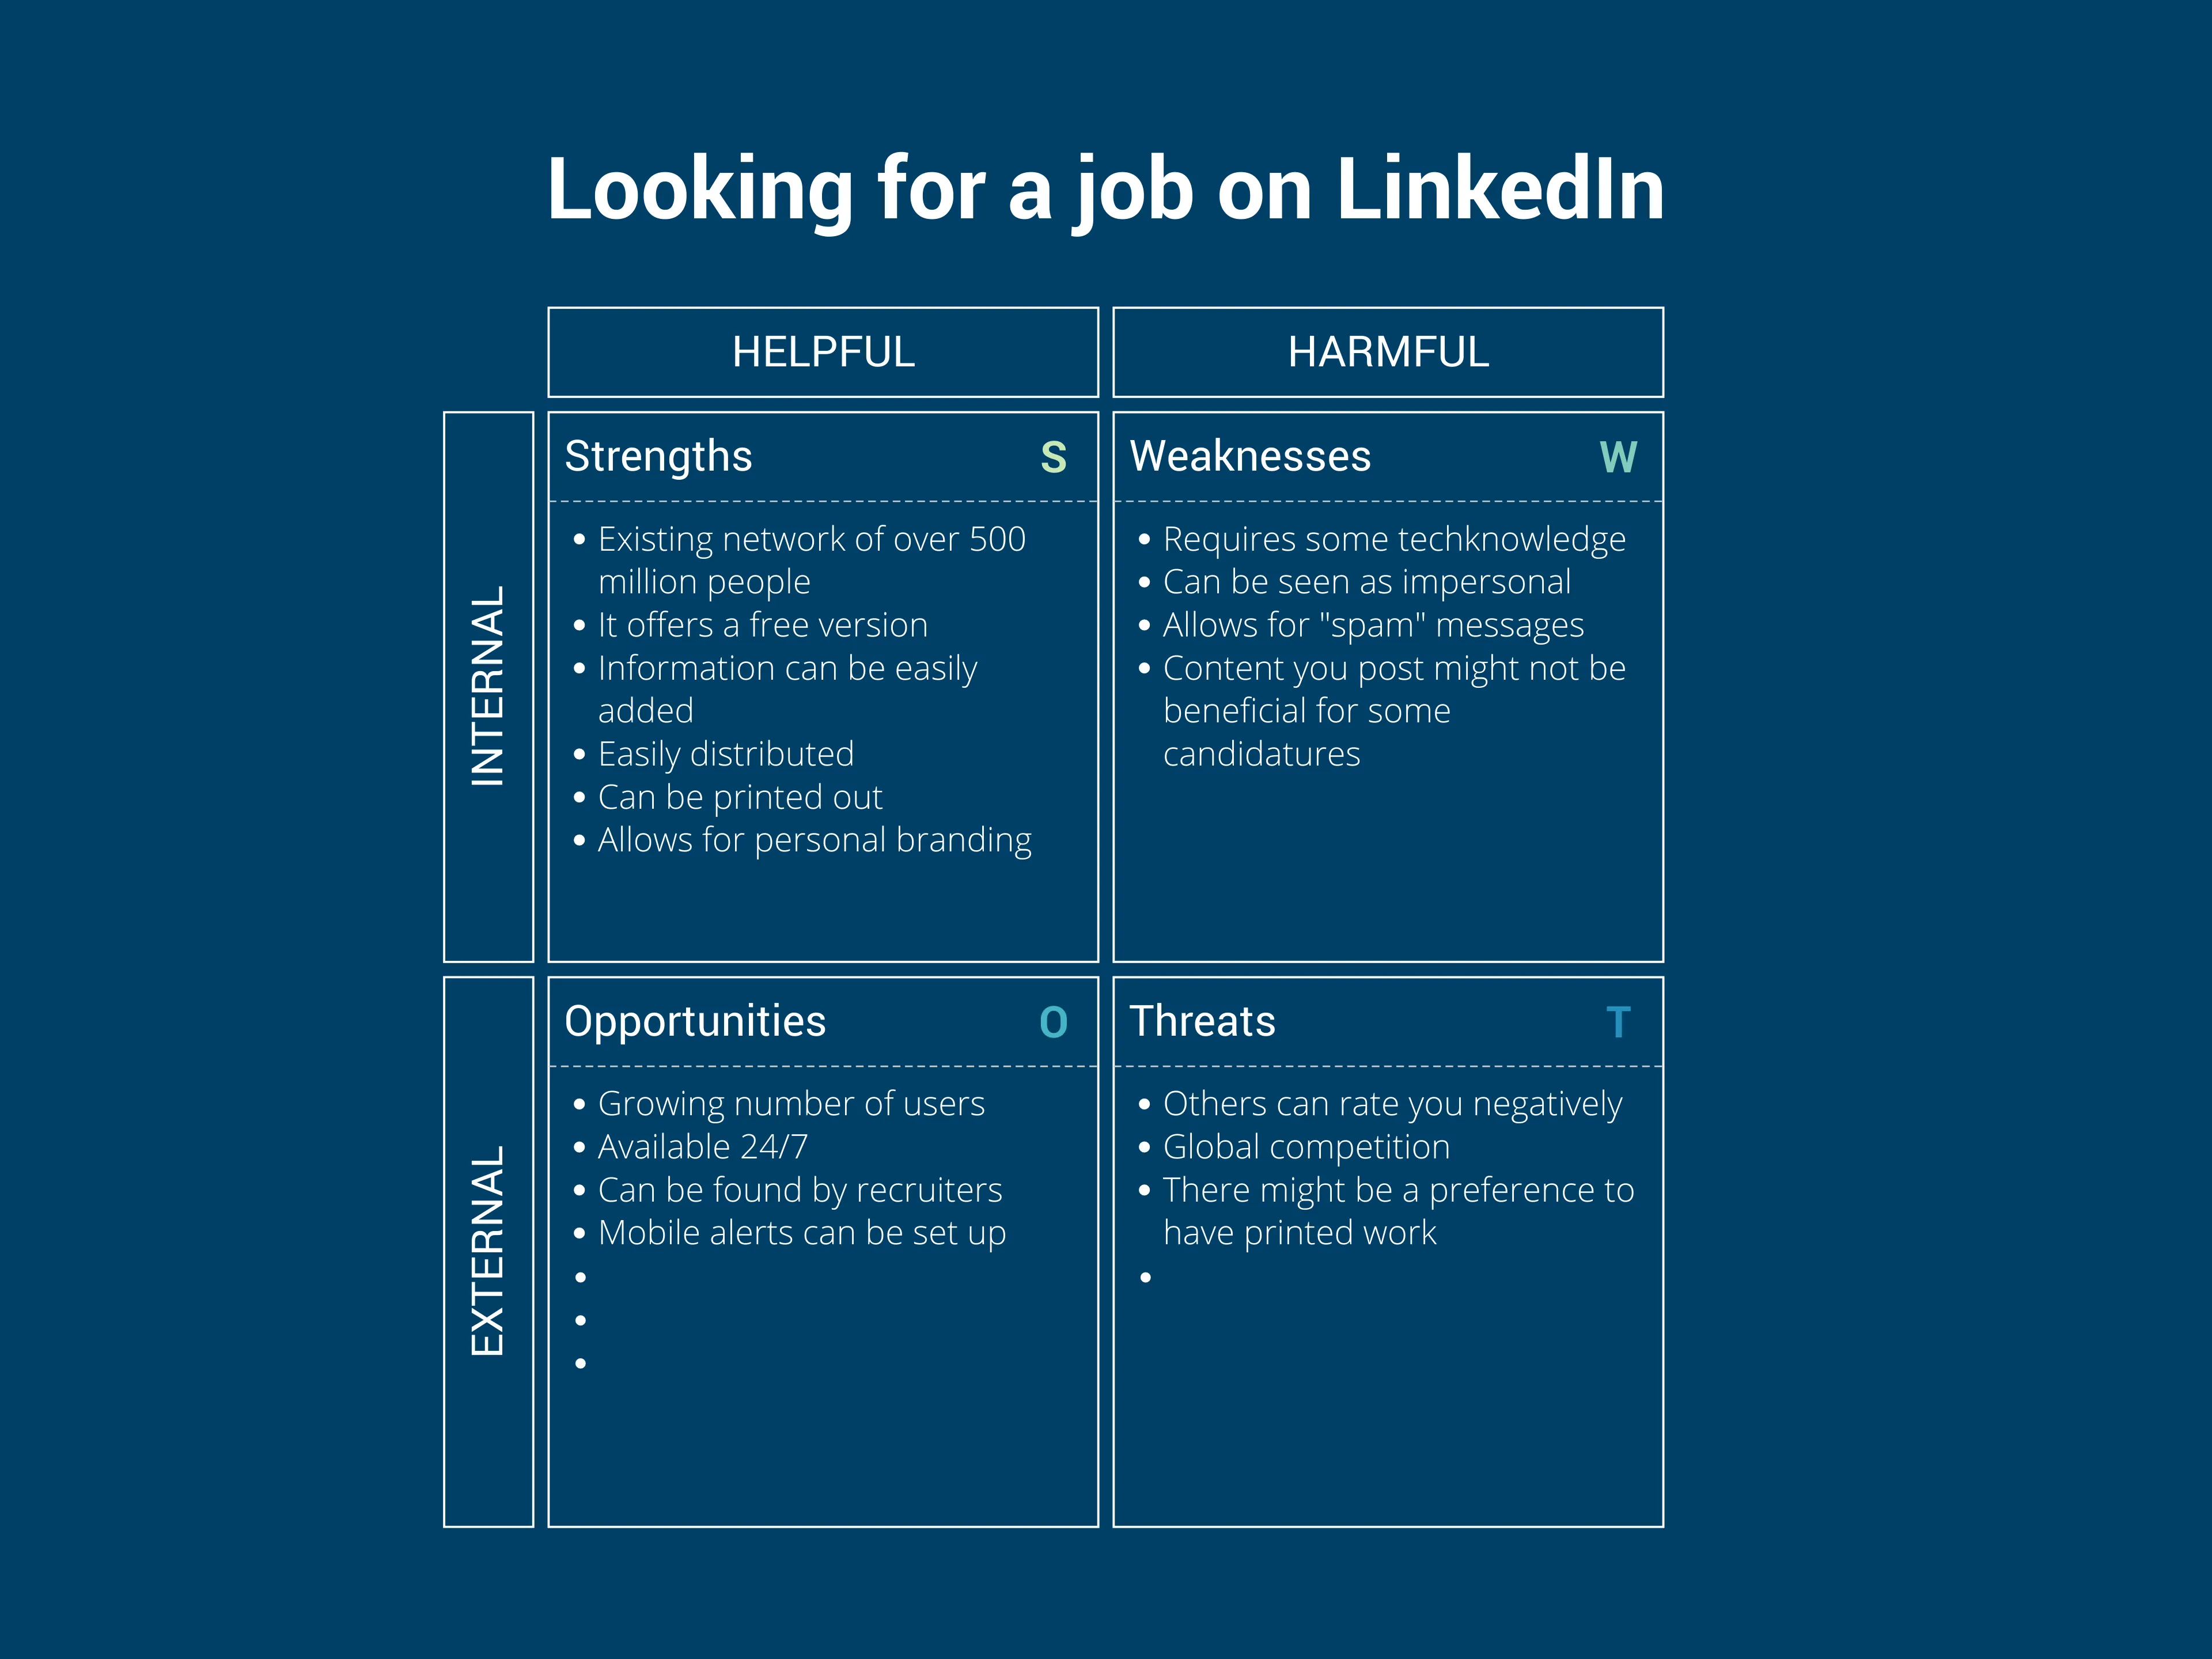 Looking for a job on LinkedIn